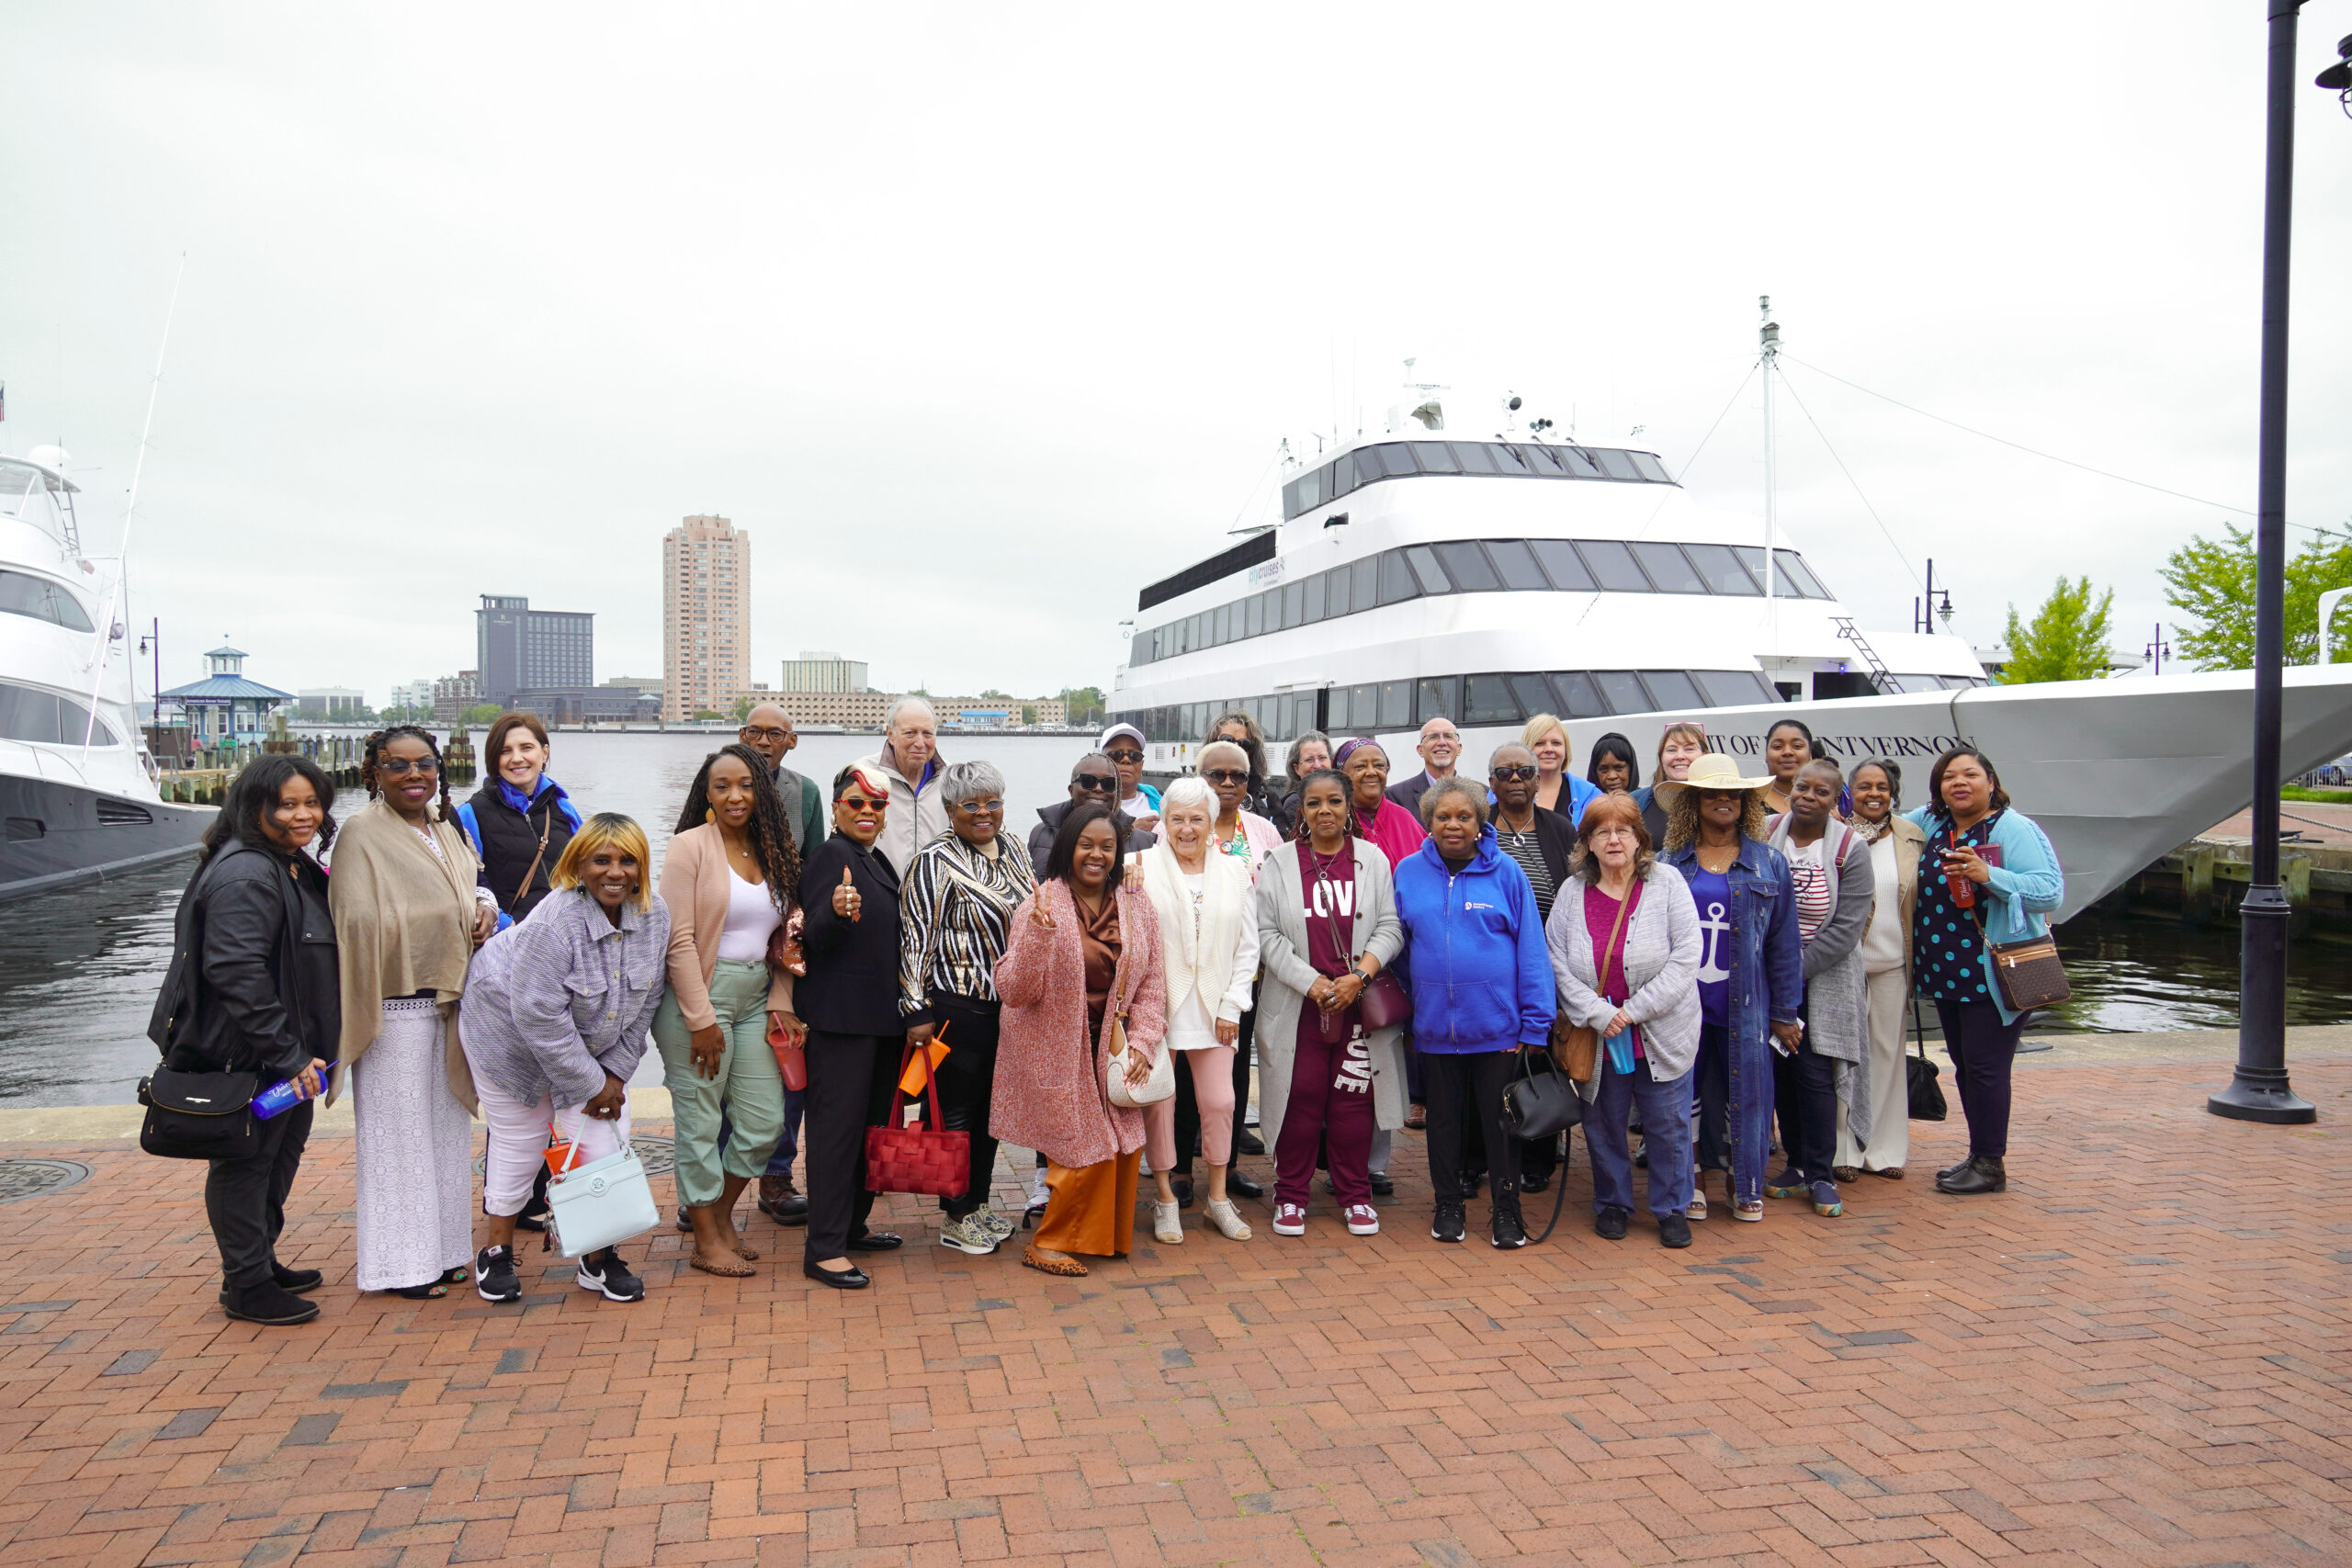 group photo of volunteers in front of cruise boat